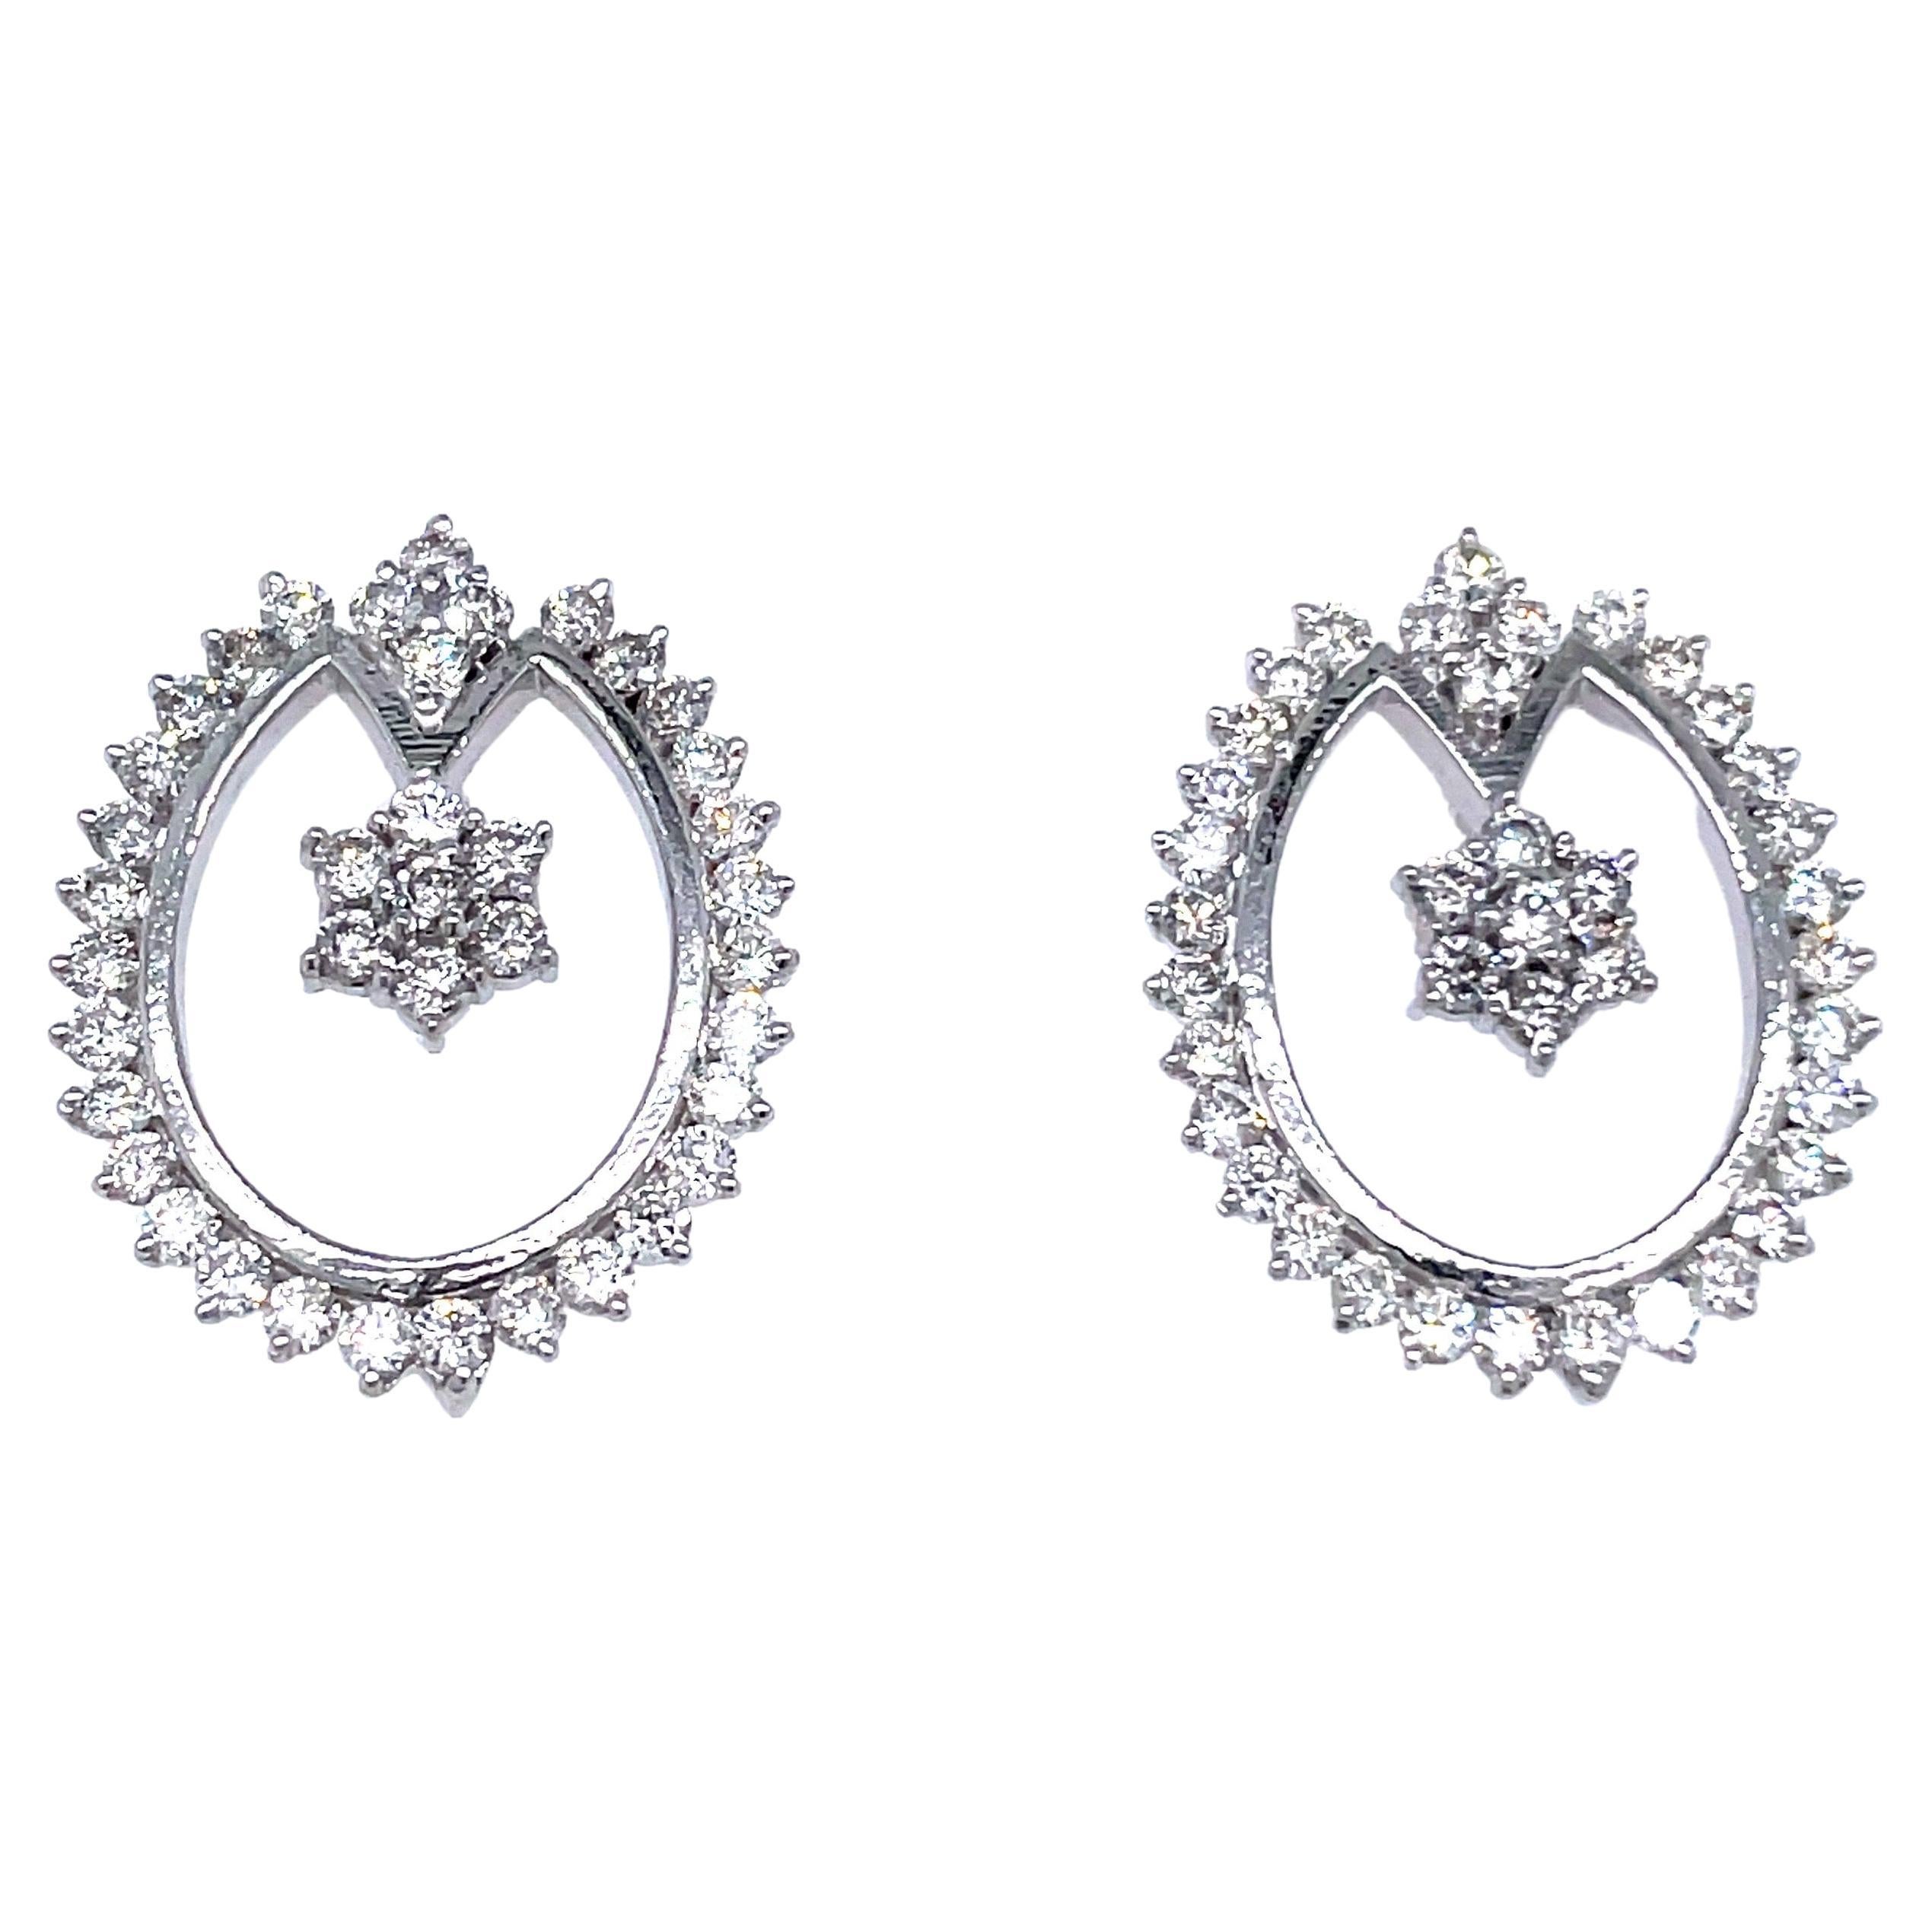 14k White Gold Diamond Earrings With Tulip Pattern For Sale